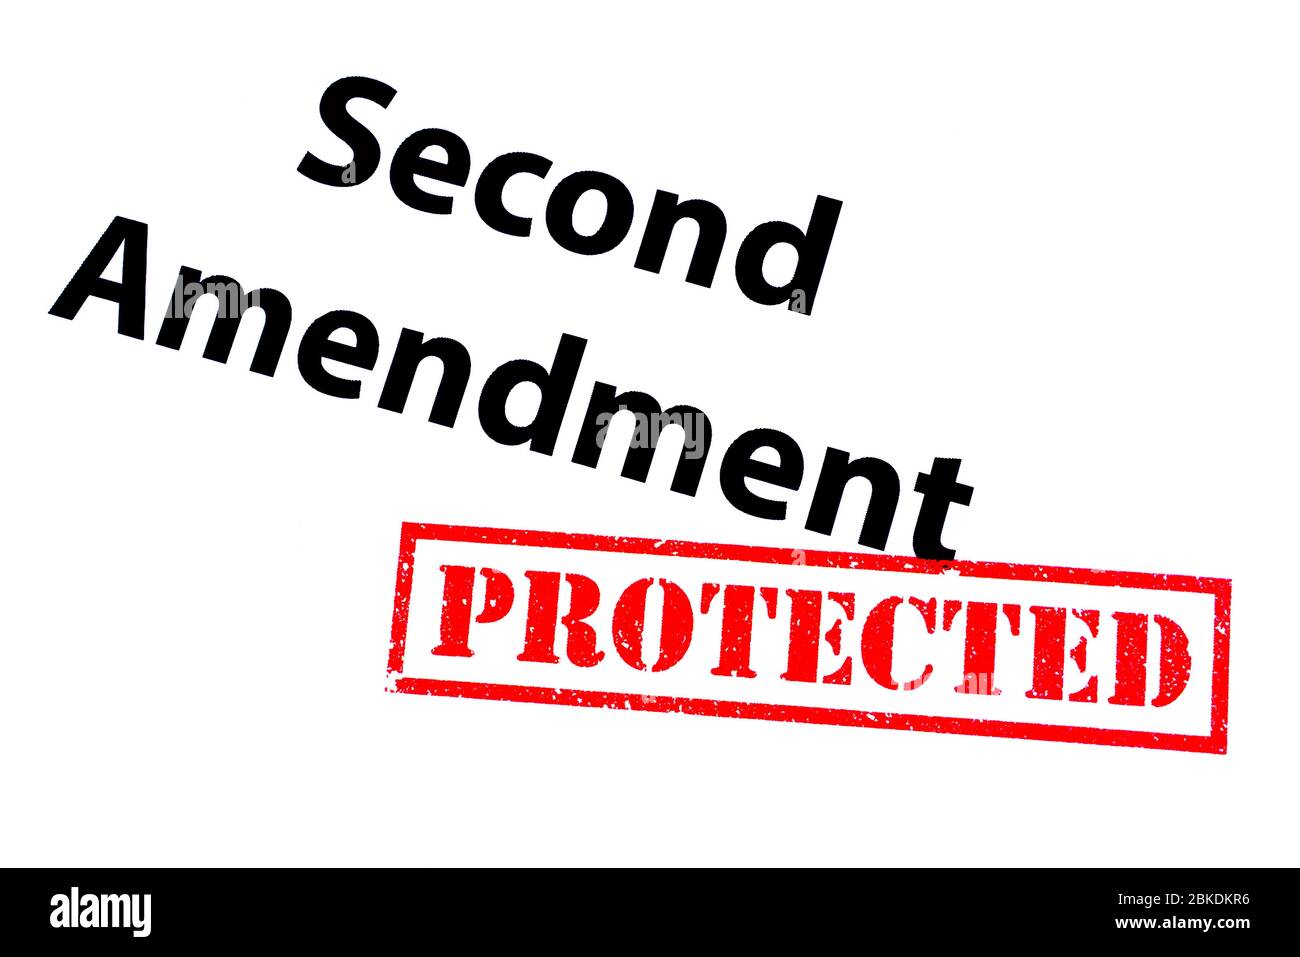 Second Amendment heading with a red PROTECTED rubber stamp. Stock Photo